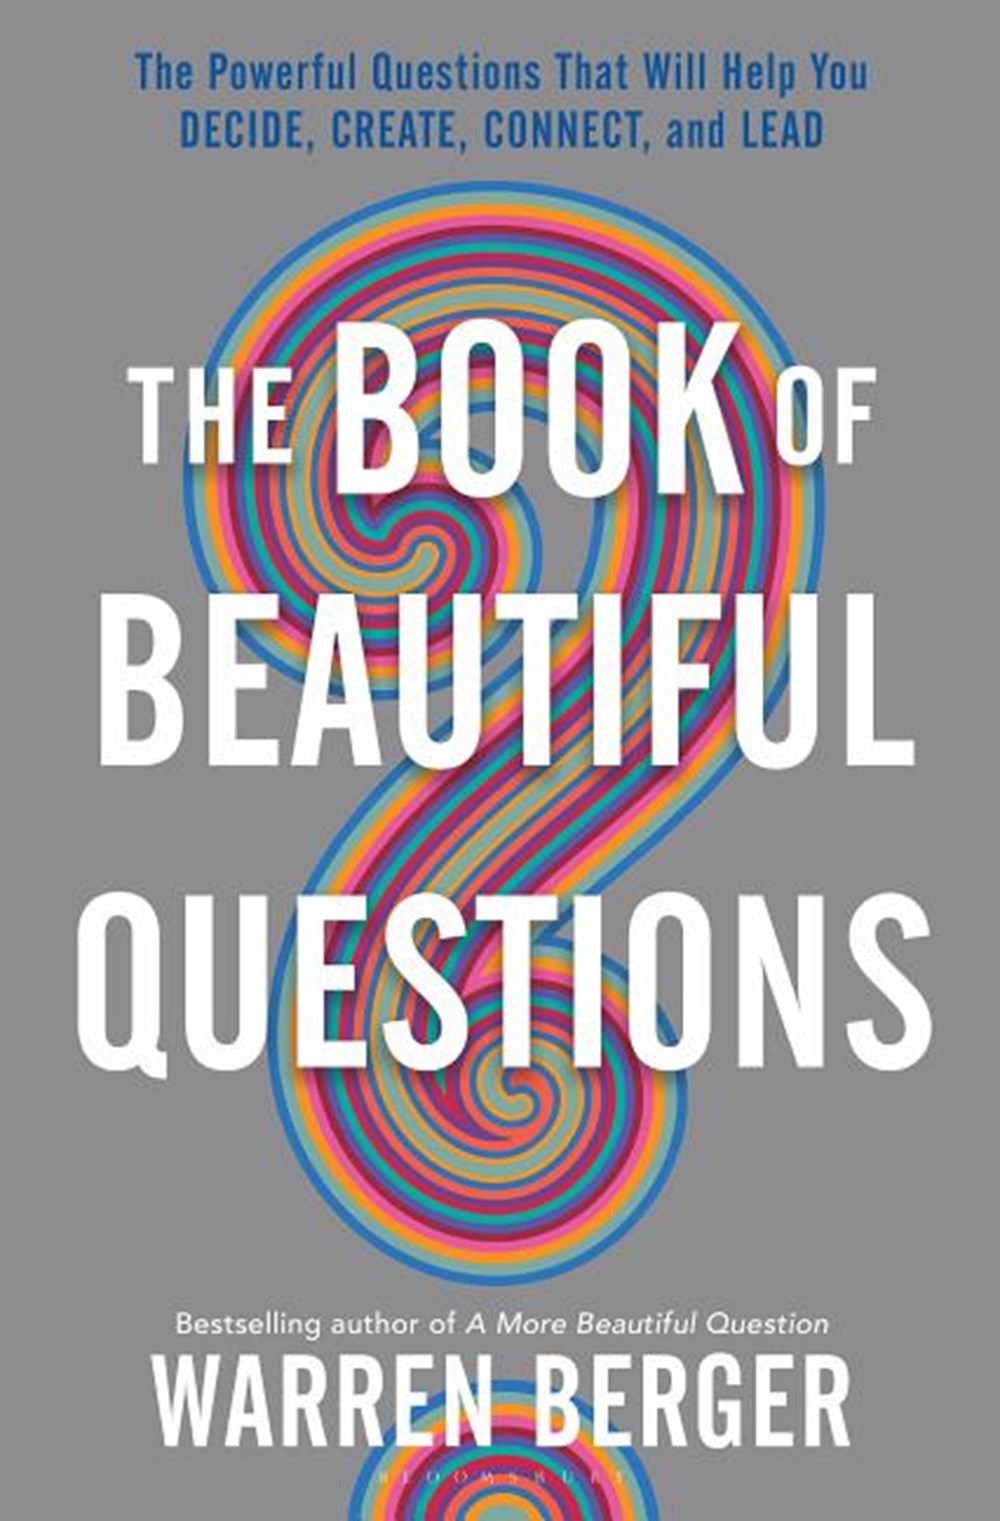 Book of Beautiful Questions: The Powerful Questions That Will Help You Decide, Create, Connect, and 